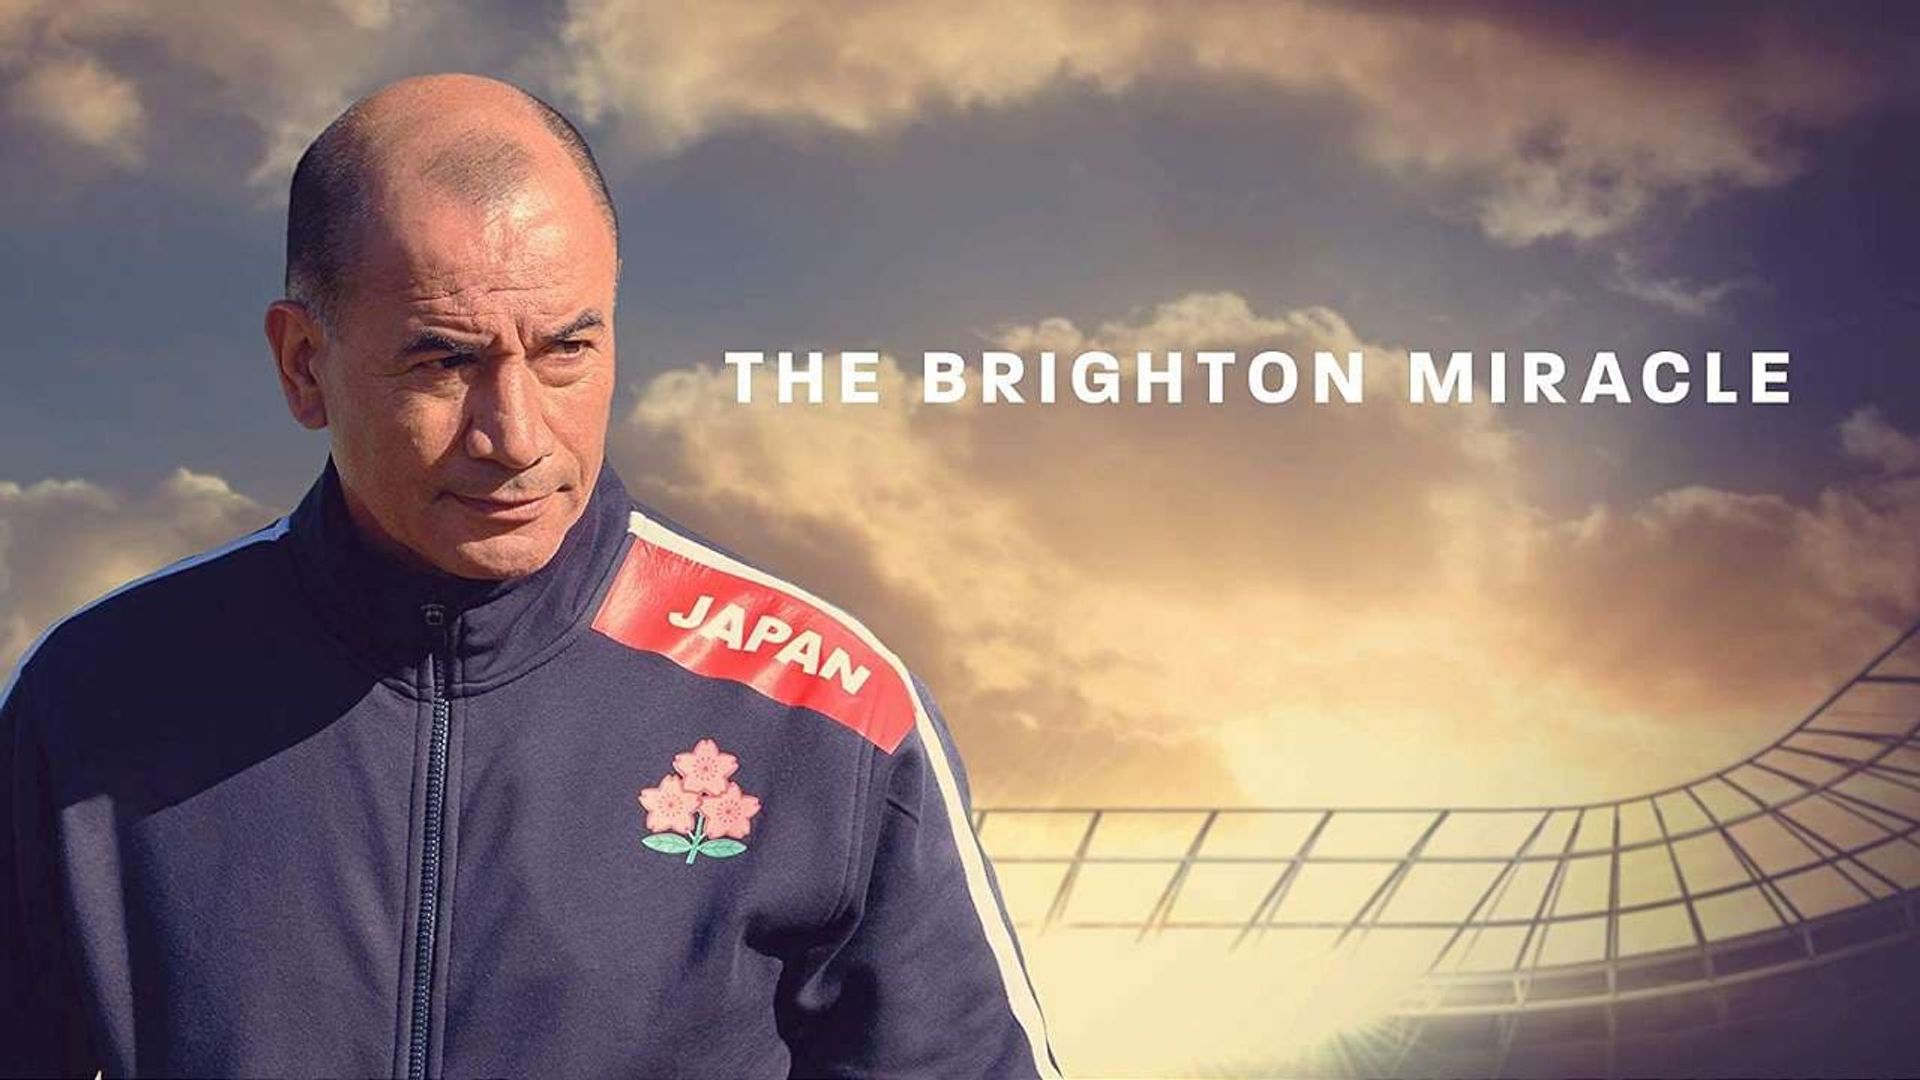 The Brighton Miracle background